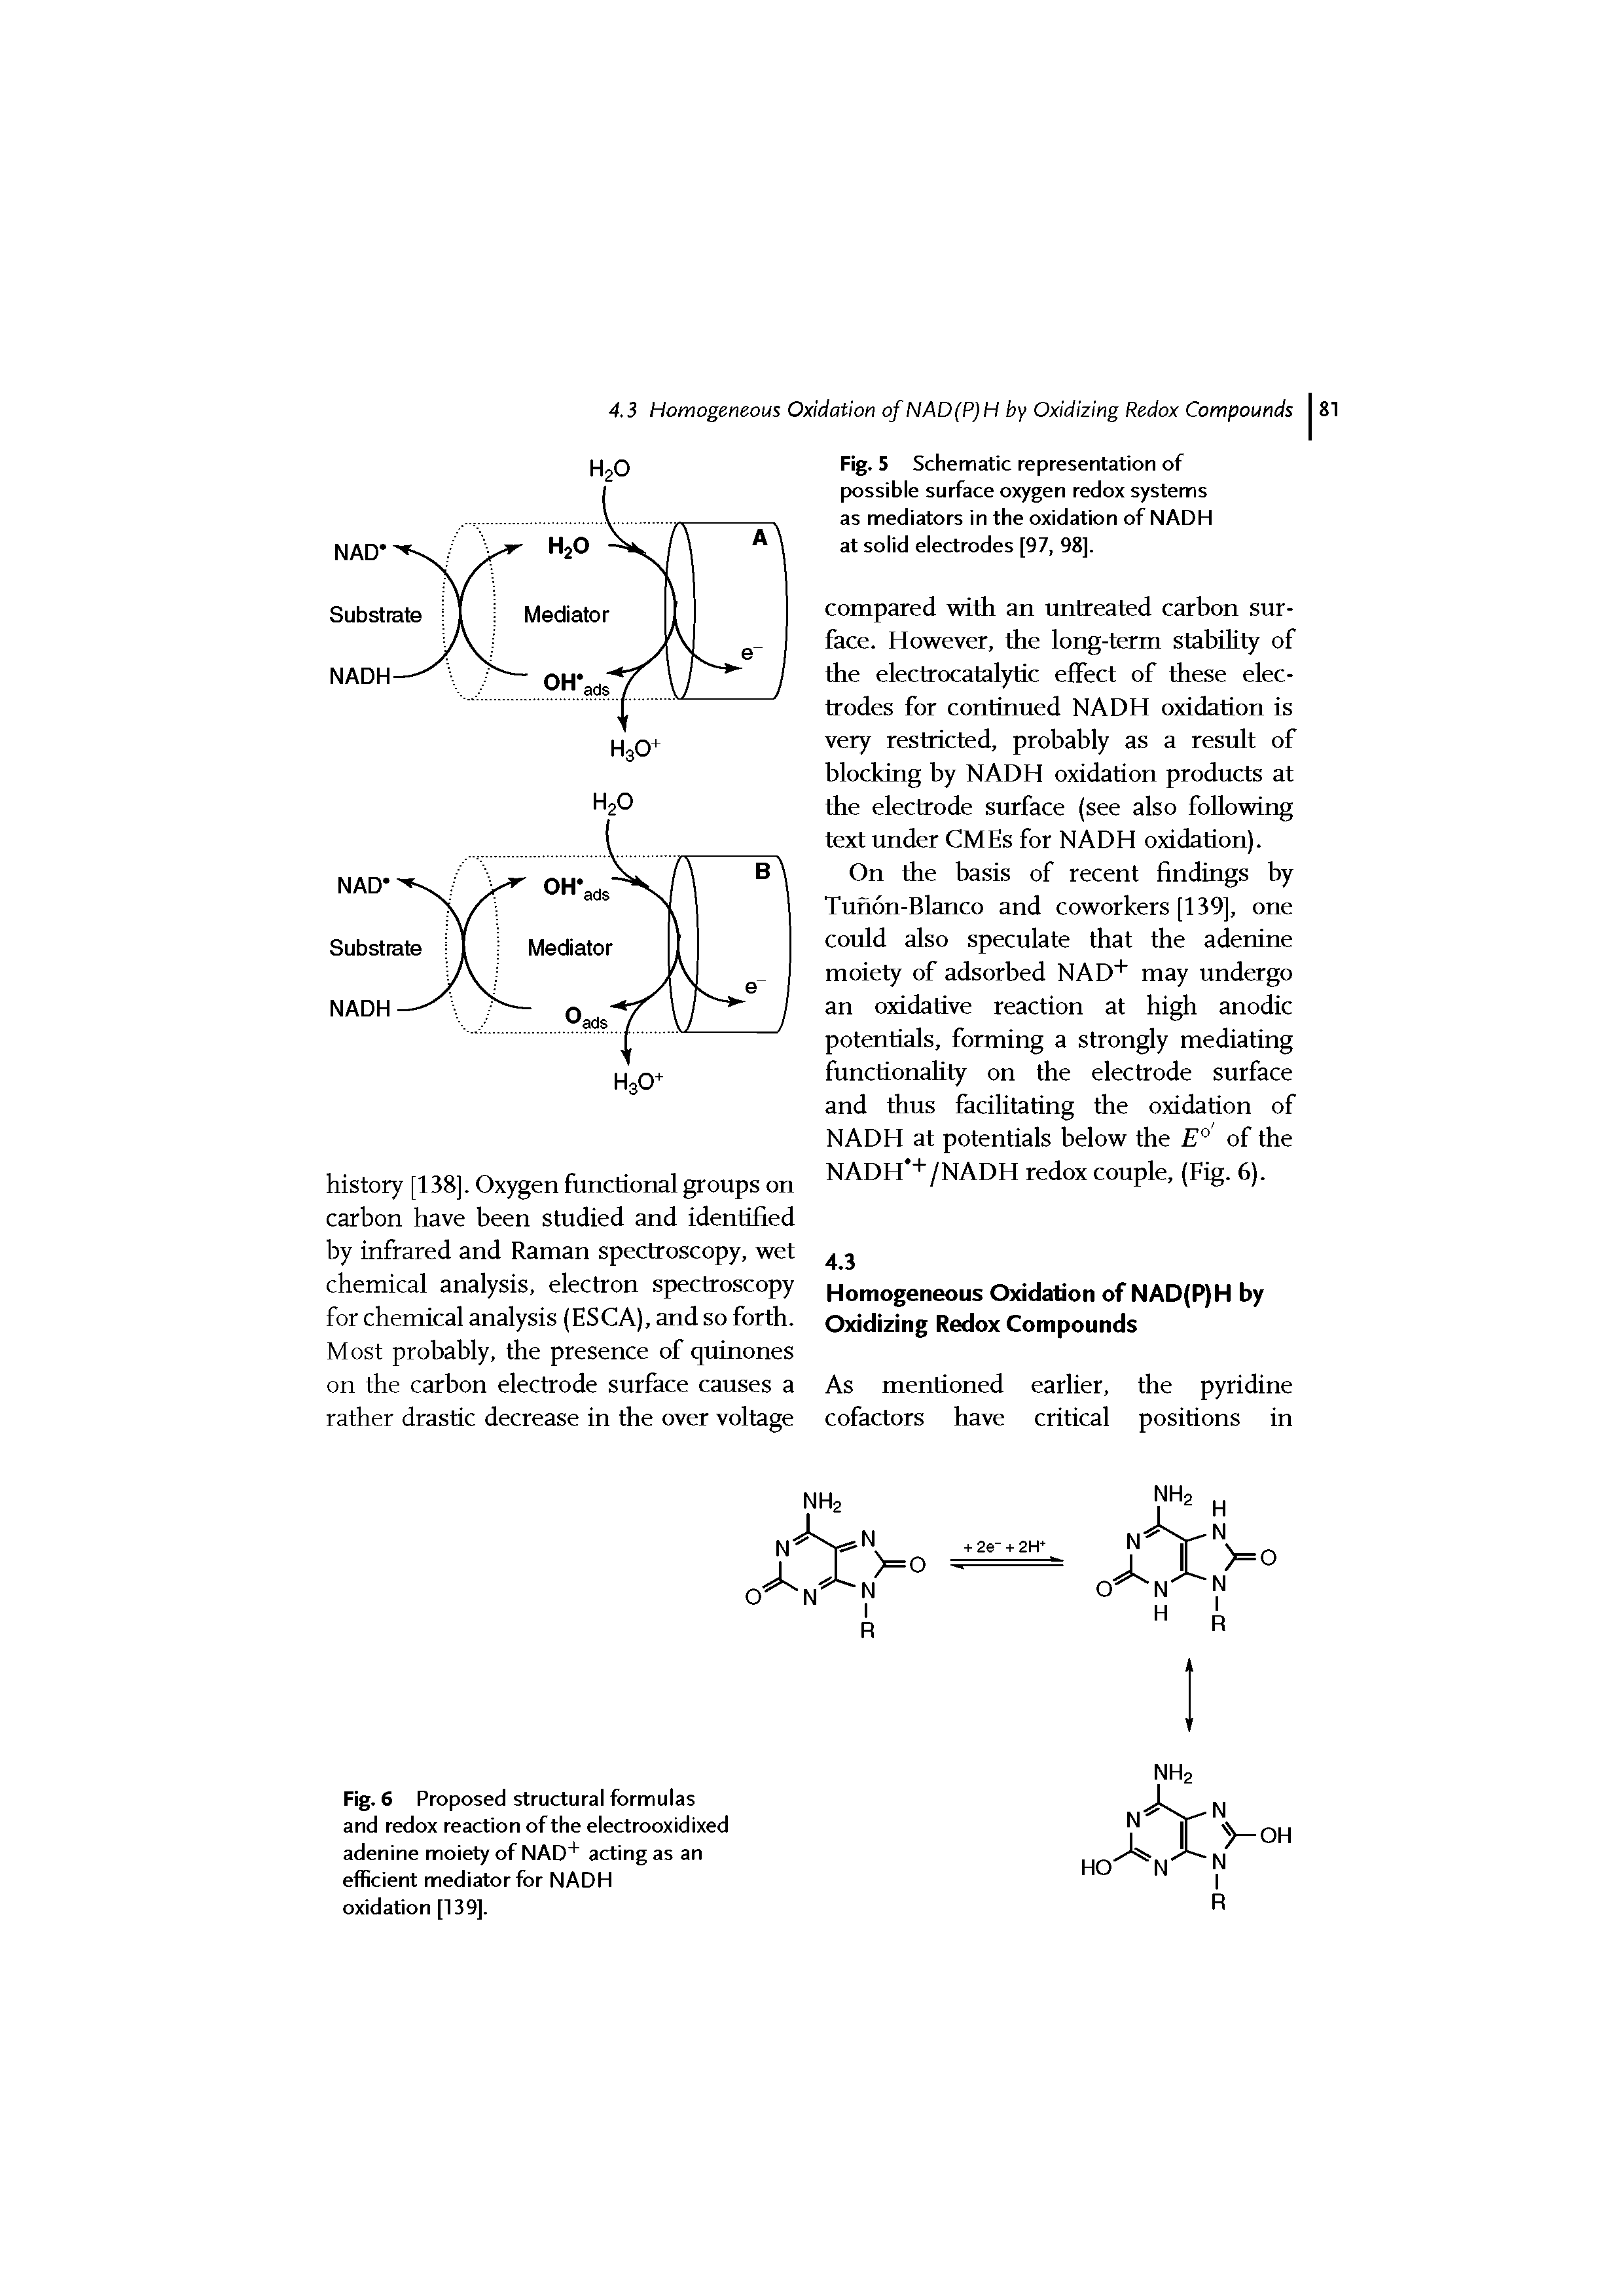 Fig. 6 Proposed structural formulas and redox reaction of the electrooxidixed adenine moiety of NAD acting as an efficient mediator for NADH oxidation [139].